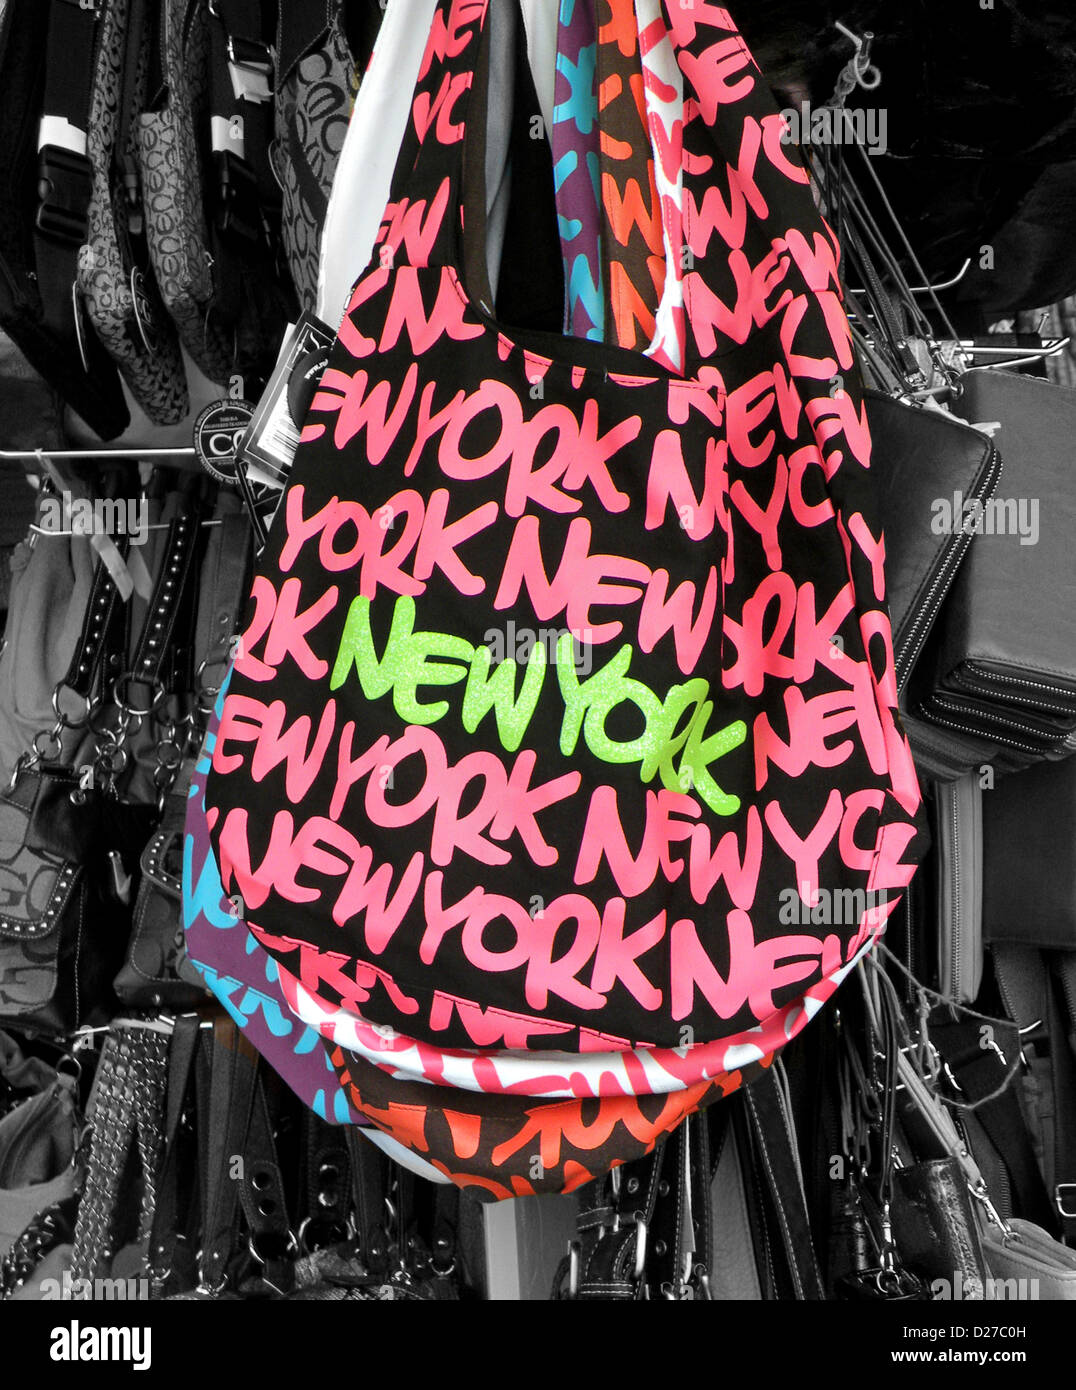 NEW YORK Handbag for sale in a Chinatown tourist shop on Canal Street Stock Photo, Royalty Free ...